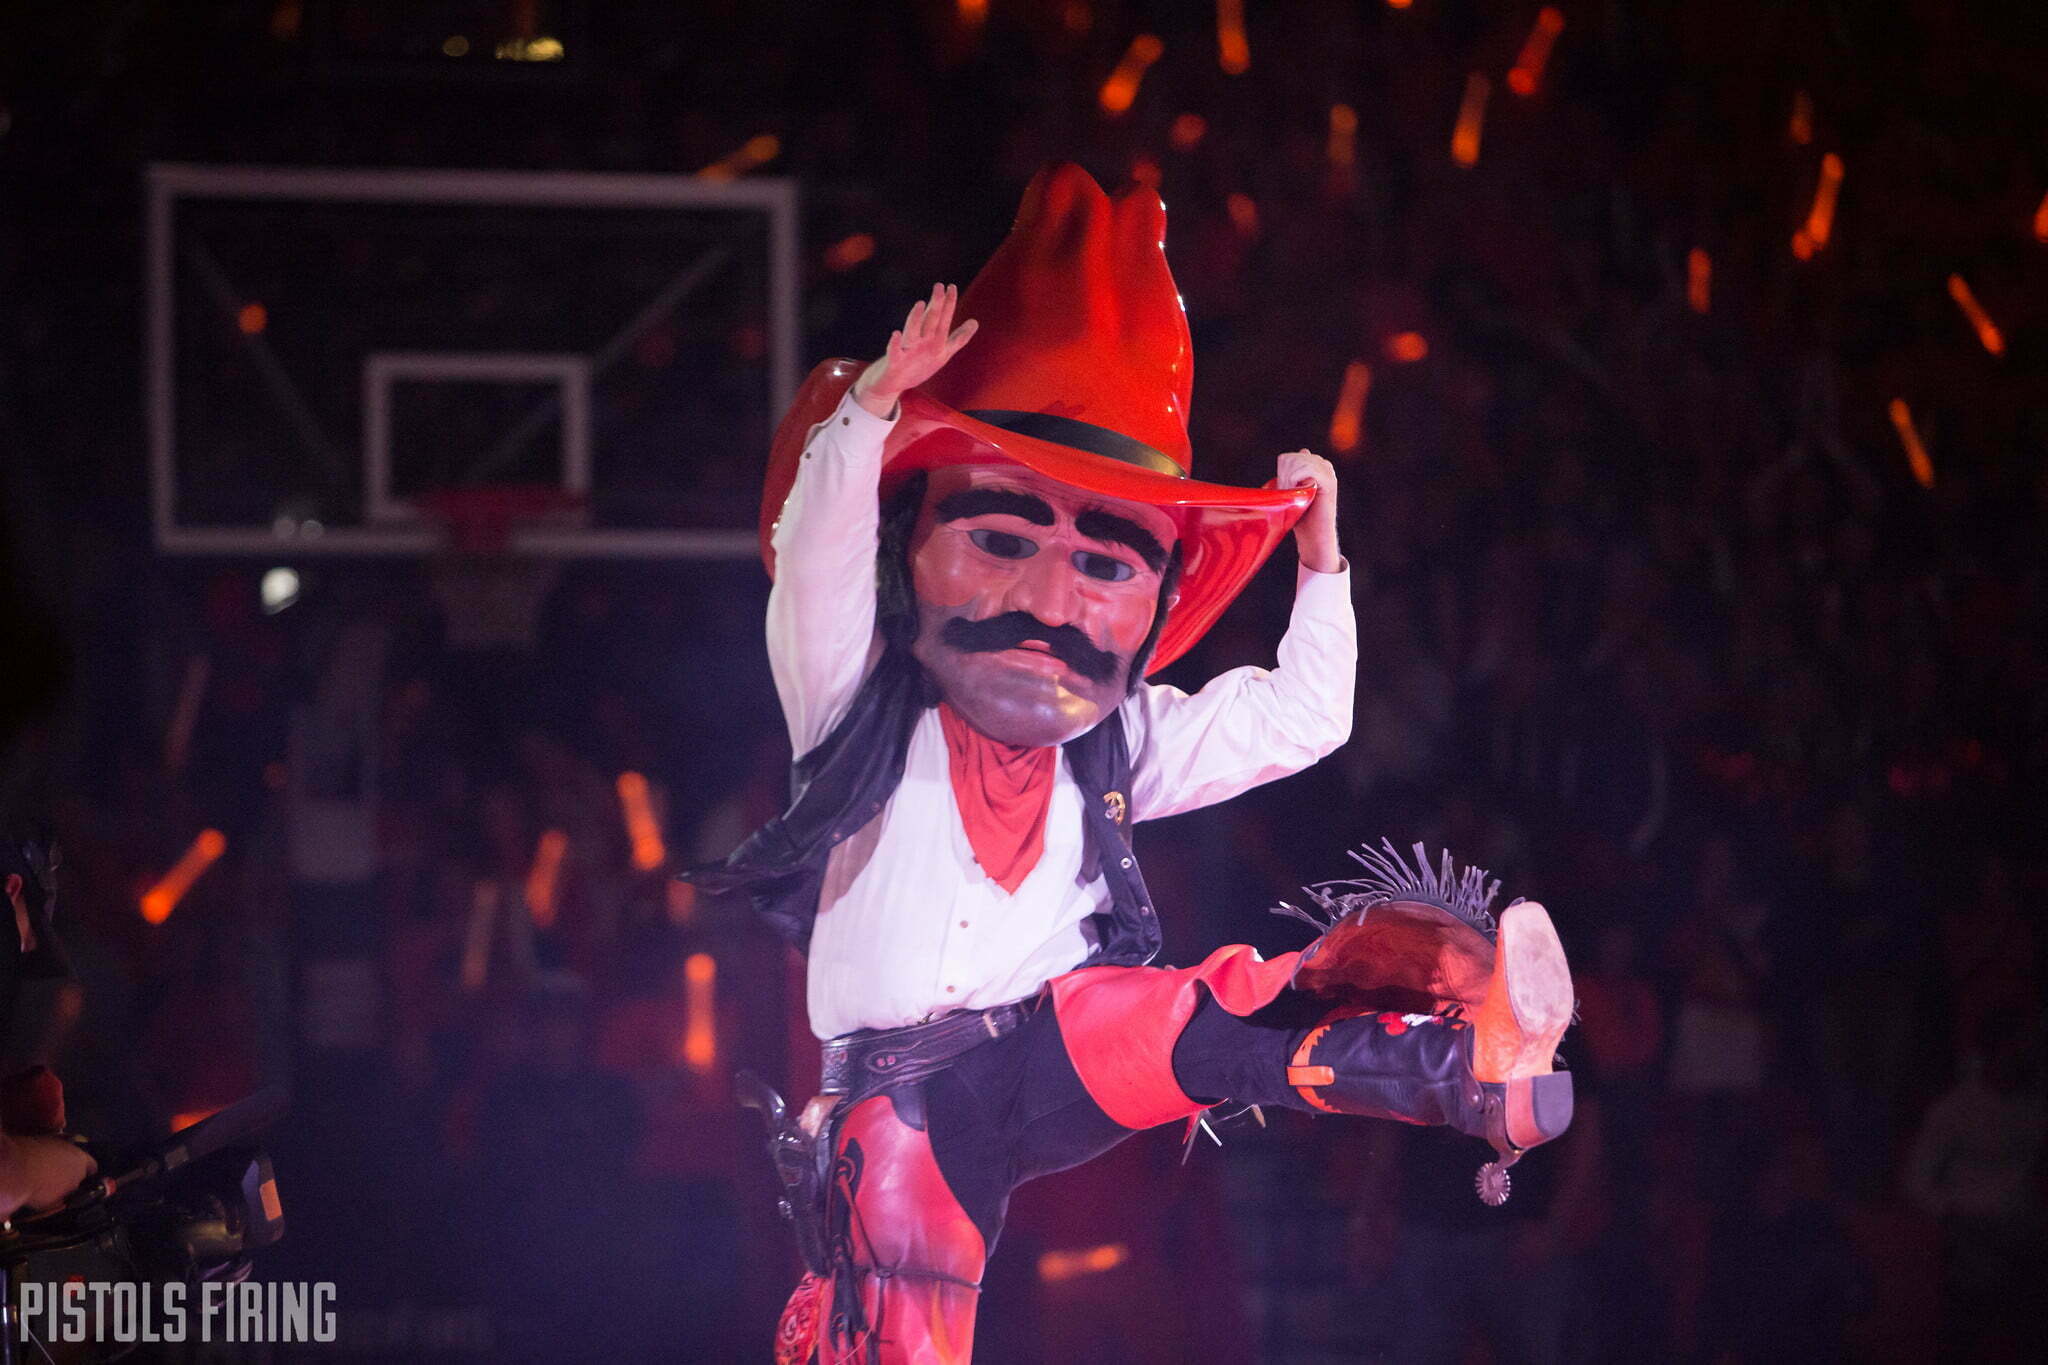 Survey ranks OSU's Pistol Pete as worst mascot in the country